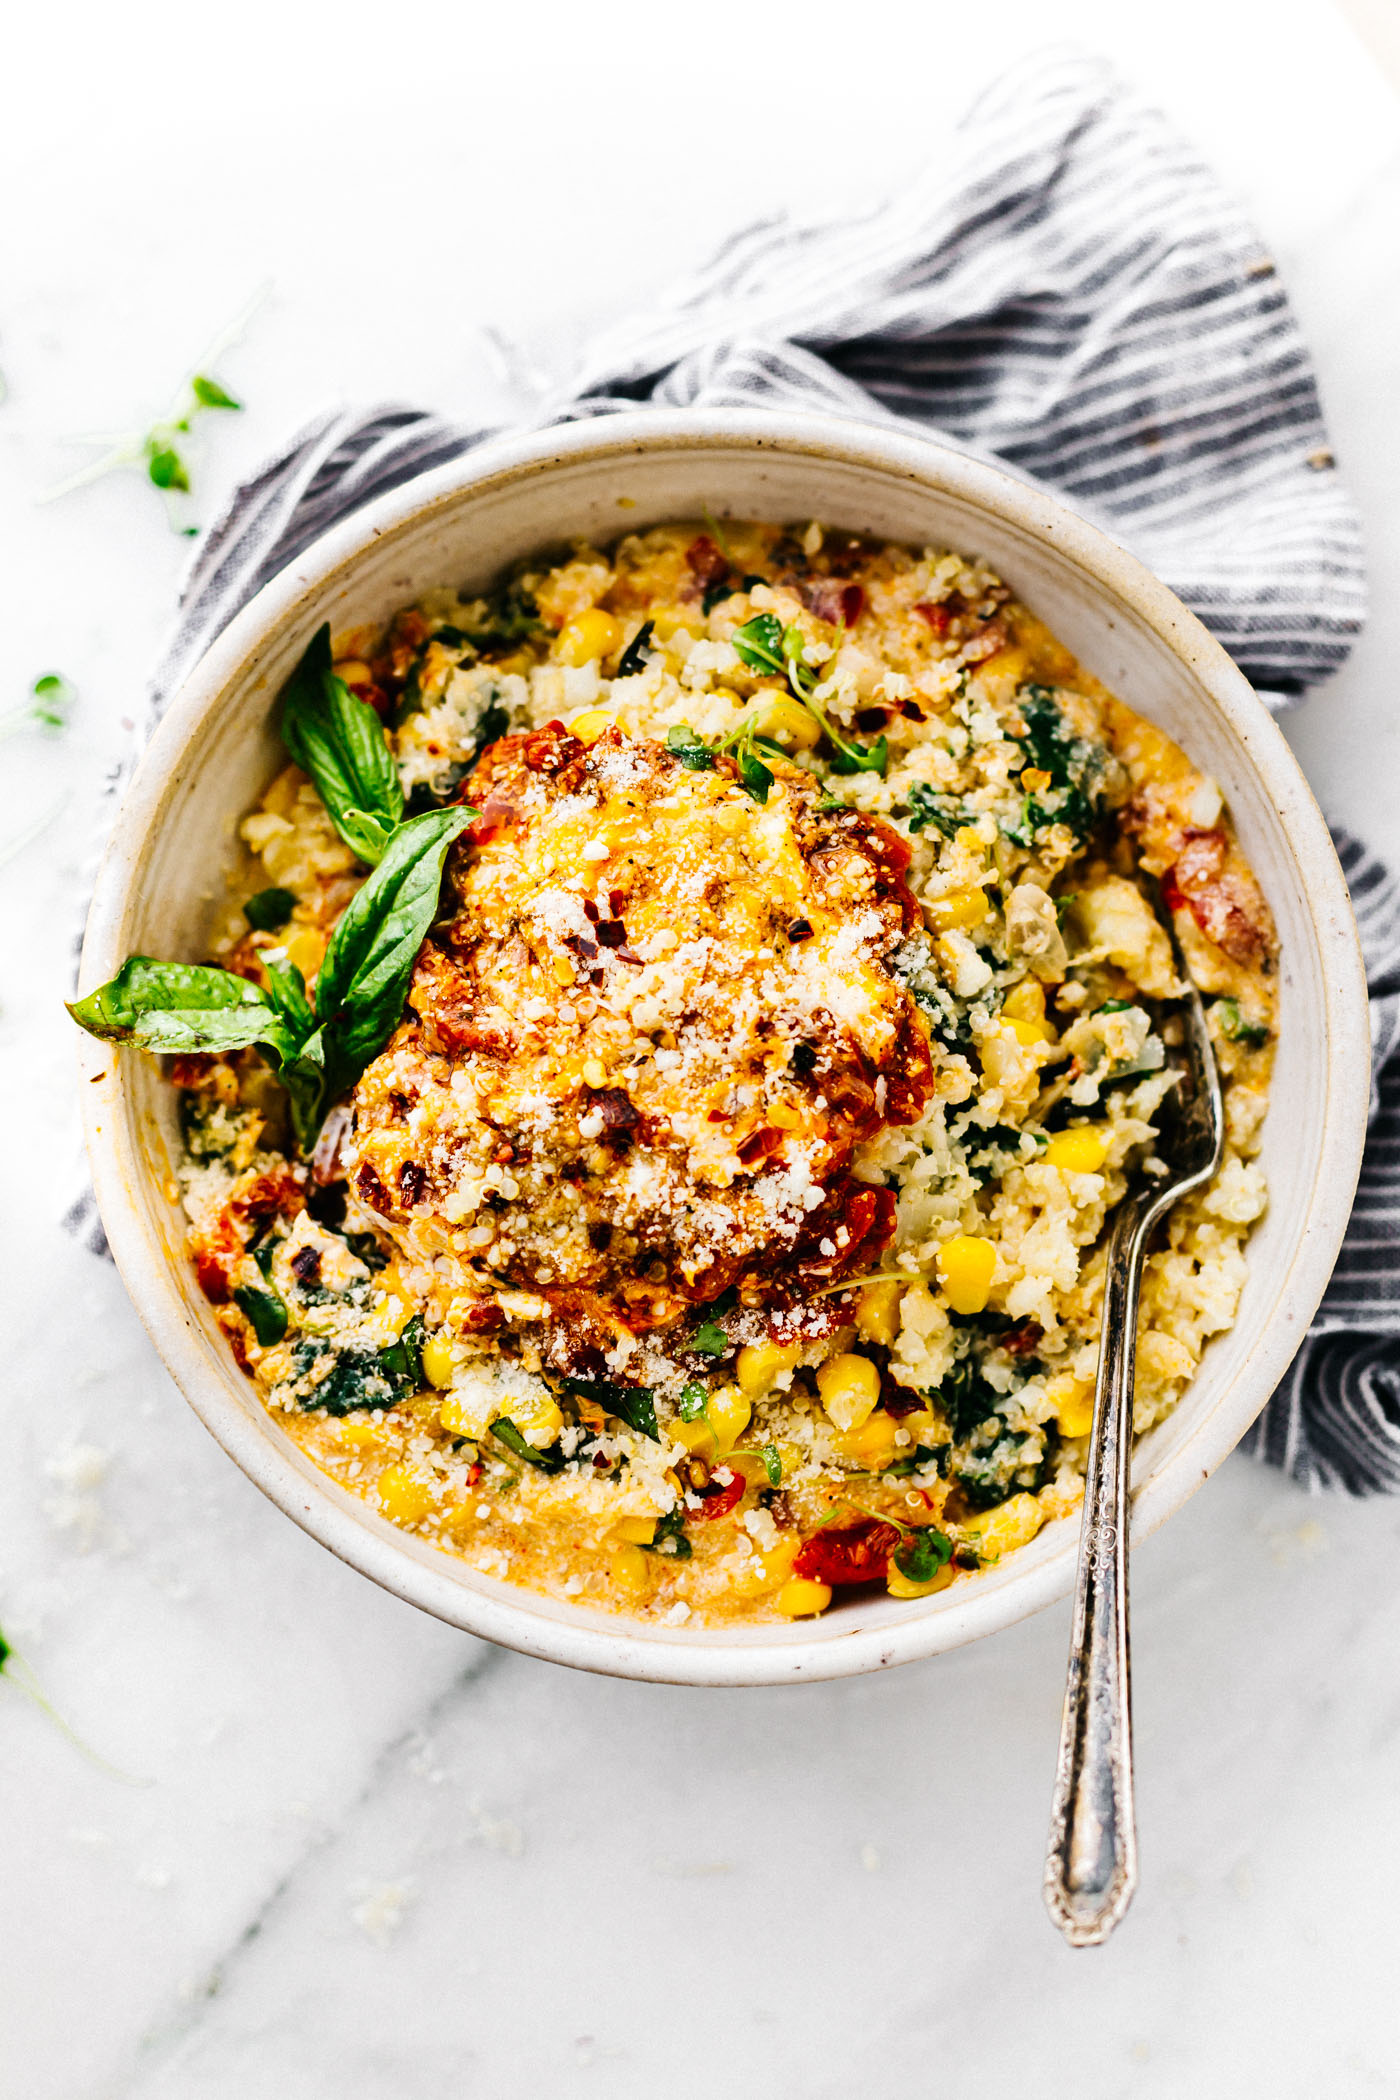 This Creamy Sweet Corn Cauliflower Grits recipe makes for a flavor packed one pot meal! Vegetarian Comfort food made lighter and healthier! Cauliflower riced into "grits" with sweet corn, Gruyere cheese, spinach, basil, onion, and more! Ready in 30 minutes